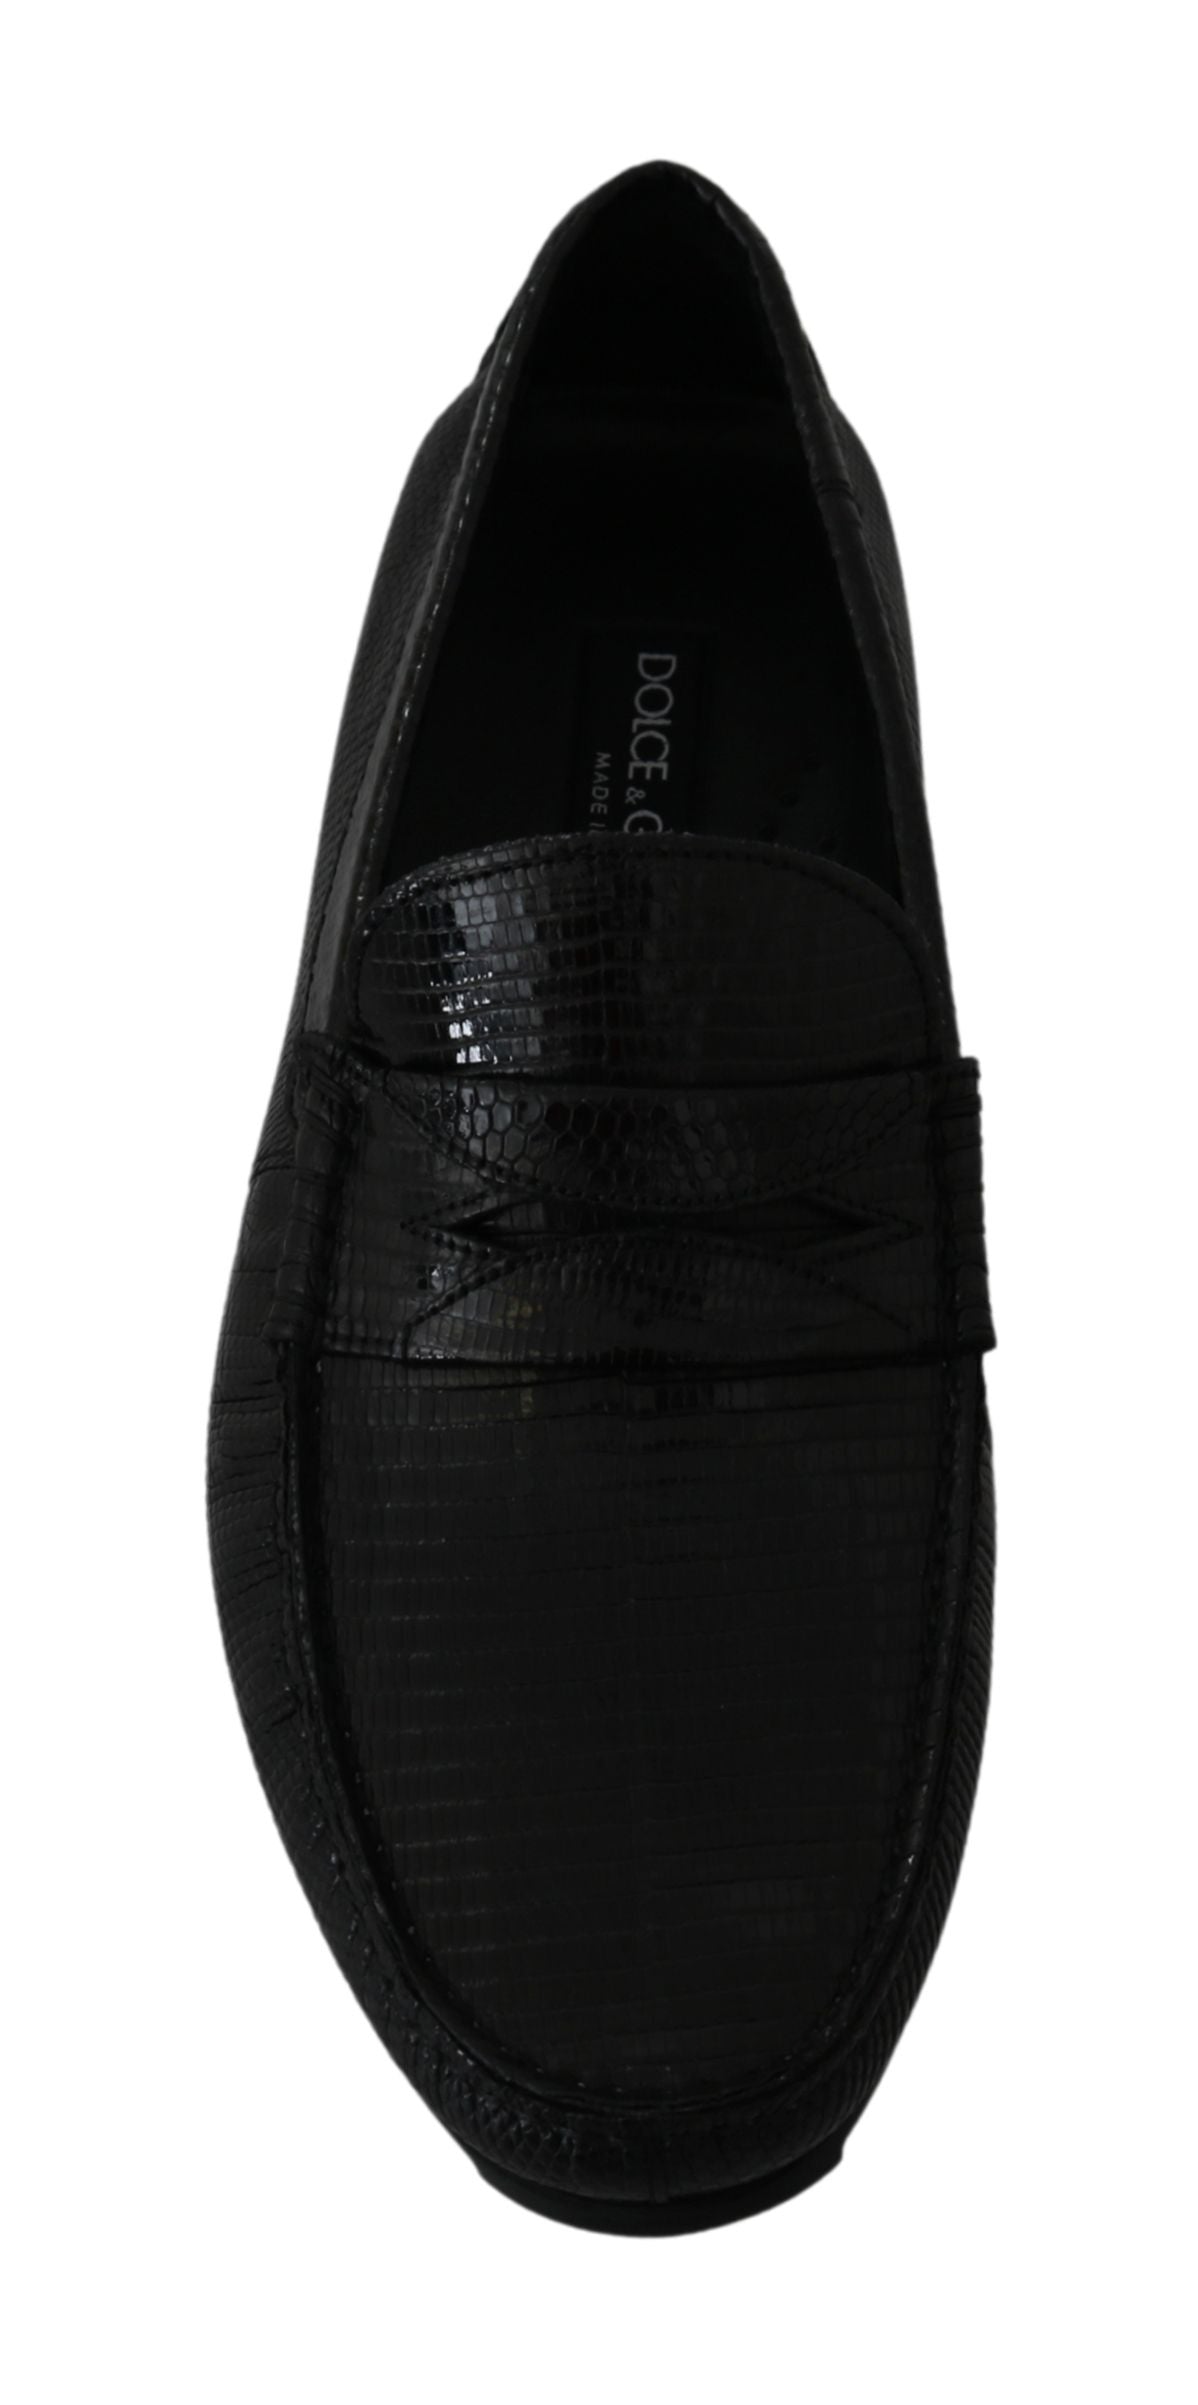 Black Lizard Leather Flat Loafers Shoes